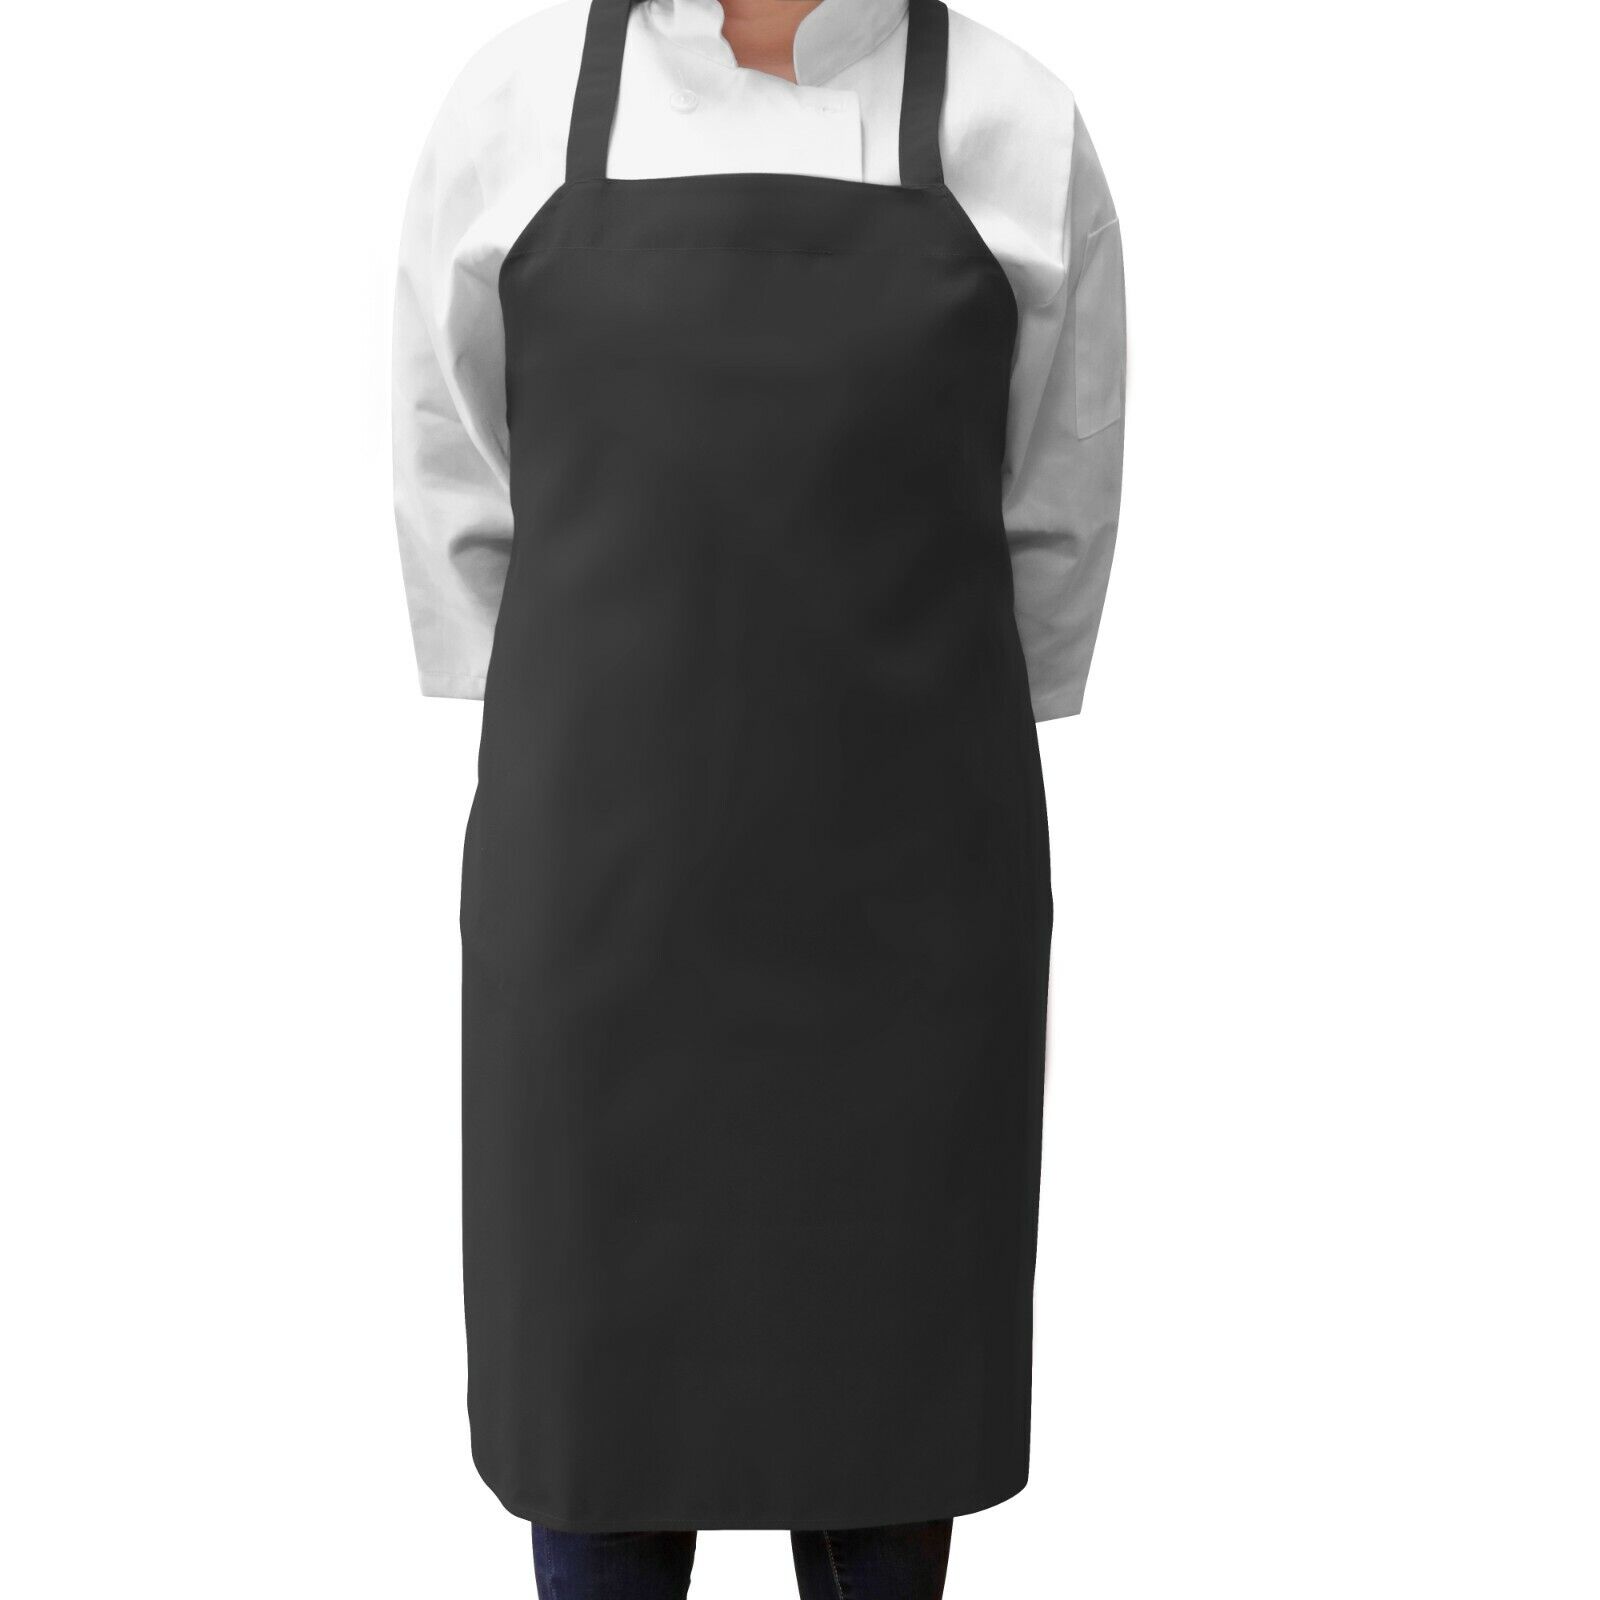 12 Pack of Kitchen Aprons - Full Bib Size Polyester Apron - Black Red or White Arkwright Does Not Apply - фотография #6